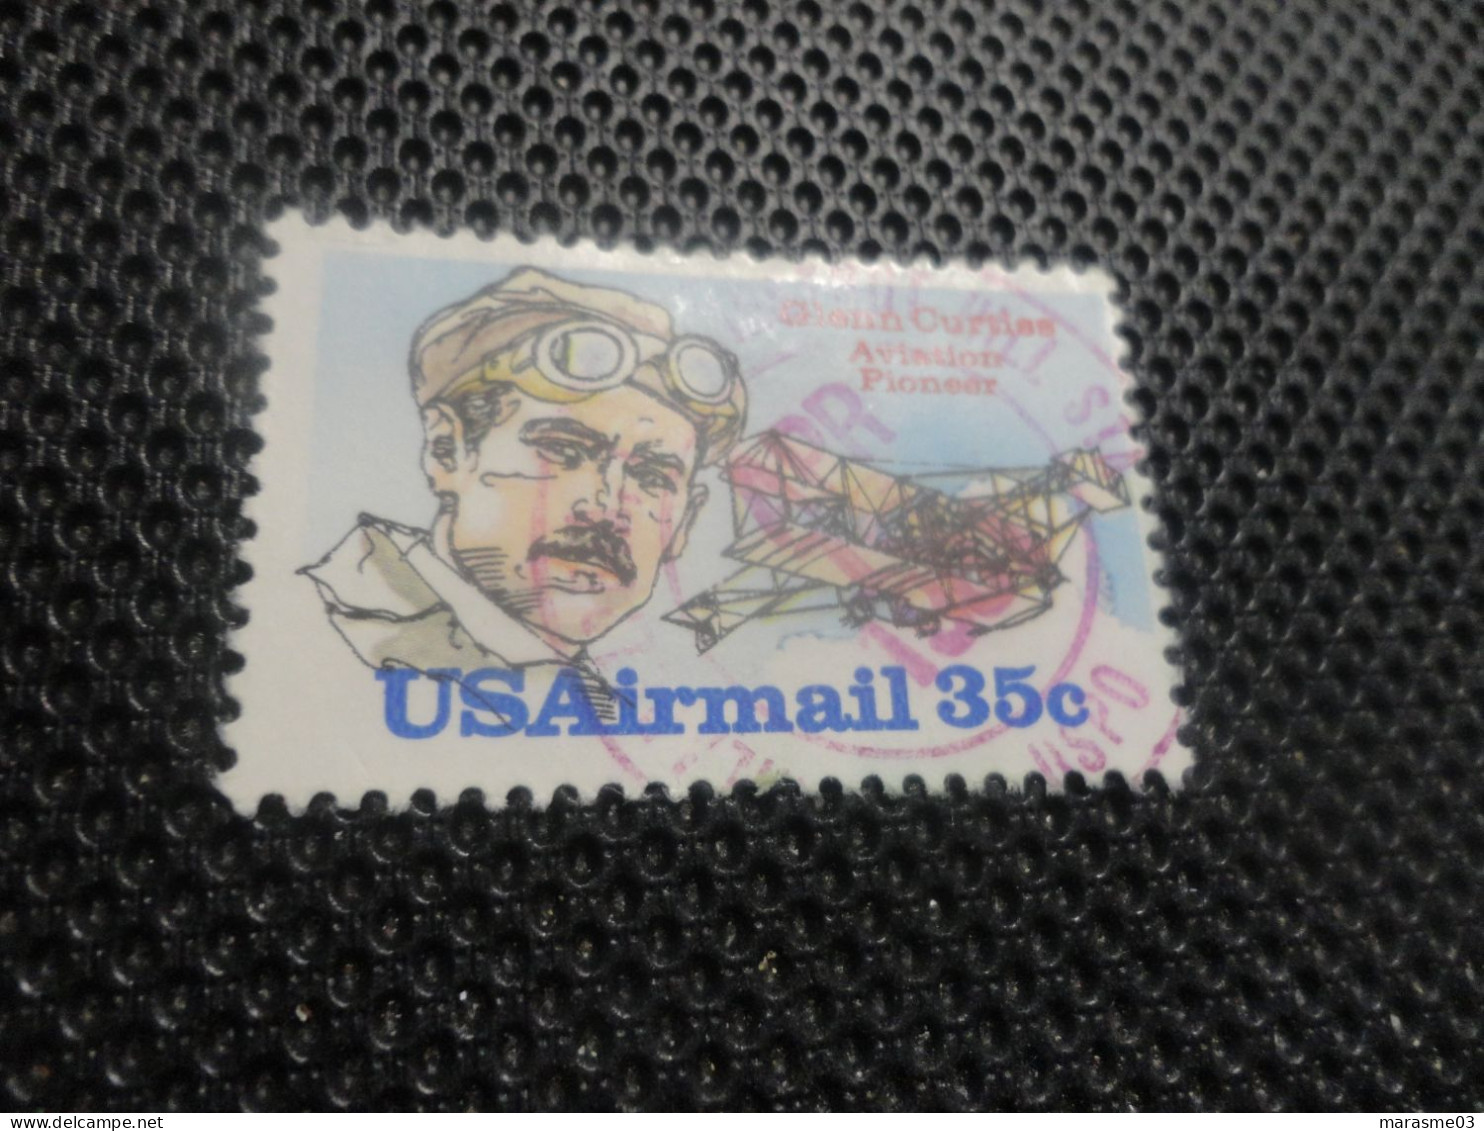 TIMBRE : U.S. 1980 AIR MAIL Glenn Curtiss 35c Stamp Sc#C100 FREE2Ship W/Tracking! (S1744) - Used Stamps